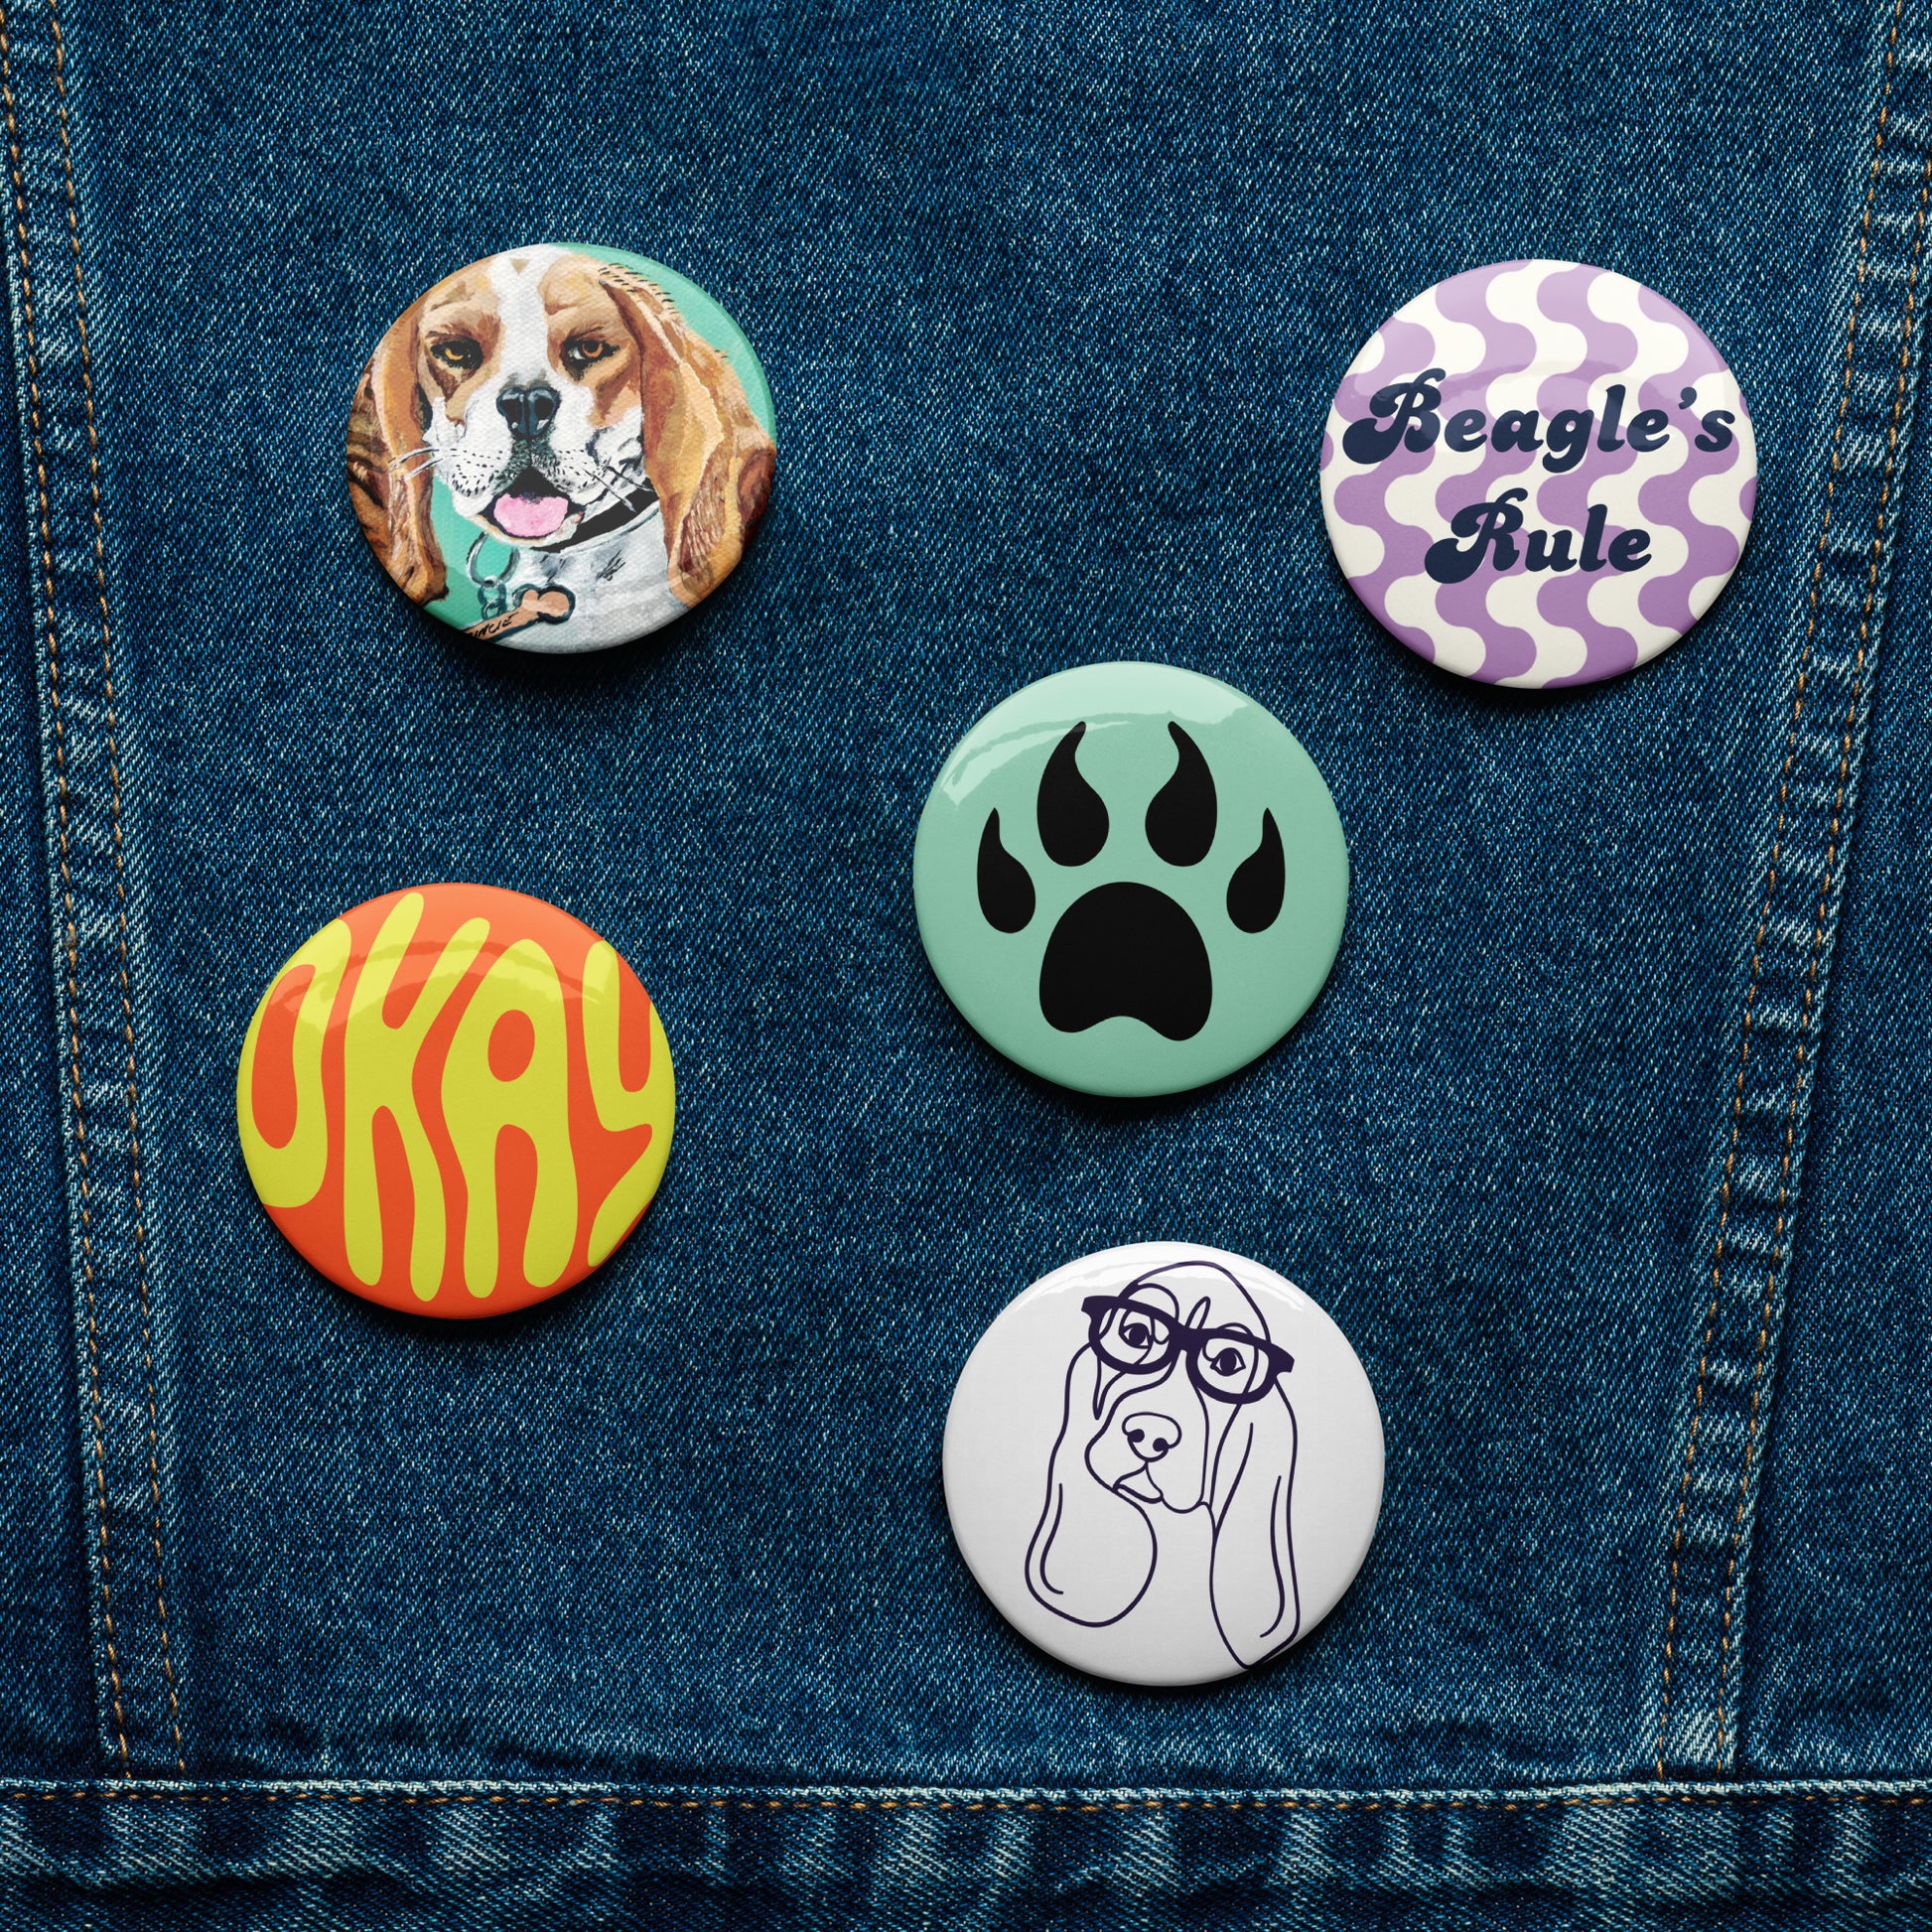 Pins, button pins, accessories for jeans, accessories for bags, accessories for backpacks 